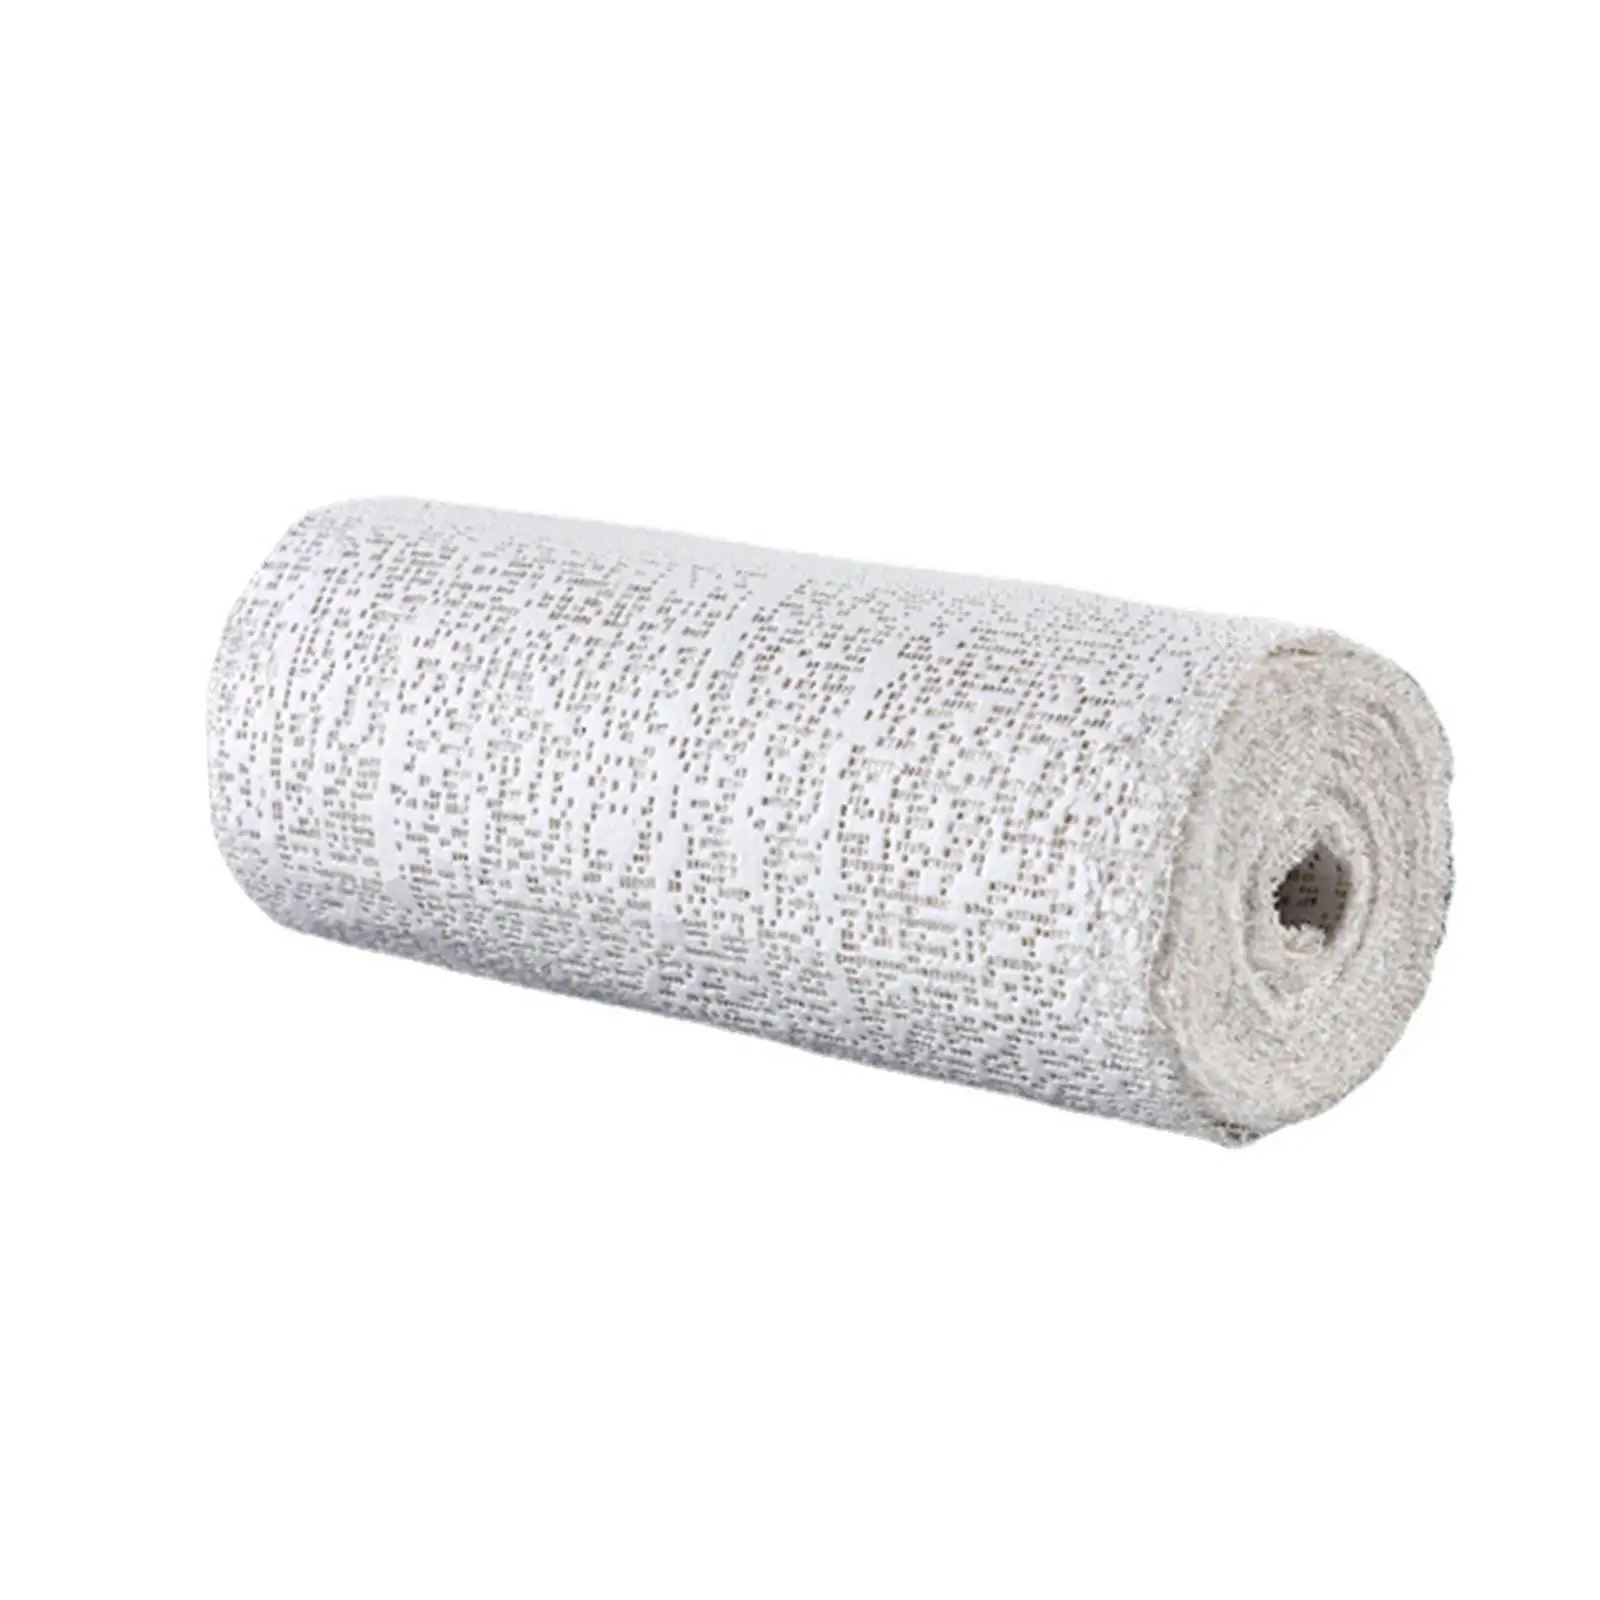 Plaster Cloth Gauze Wrap White Bandages Strips Tape Cast Material for Cast Construction Model Trains Mask Making Landscaping